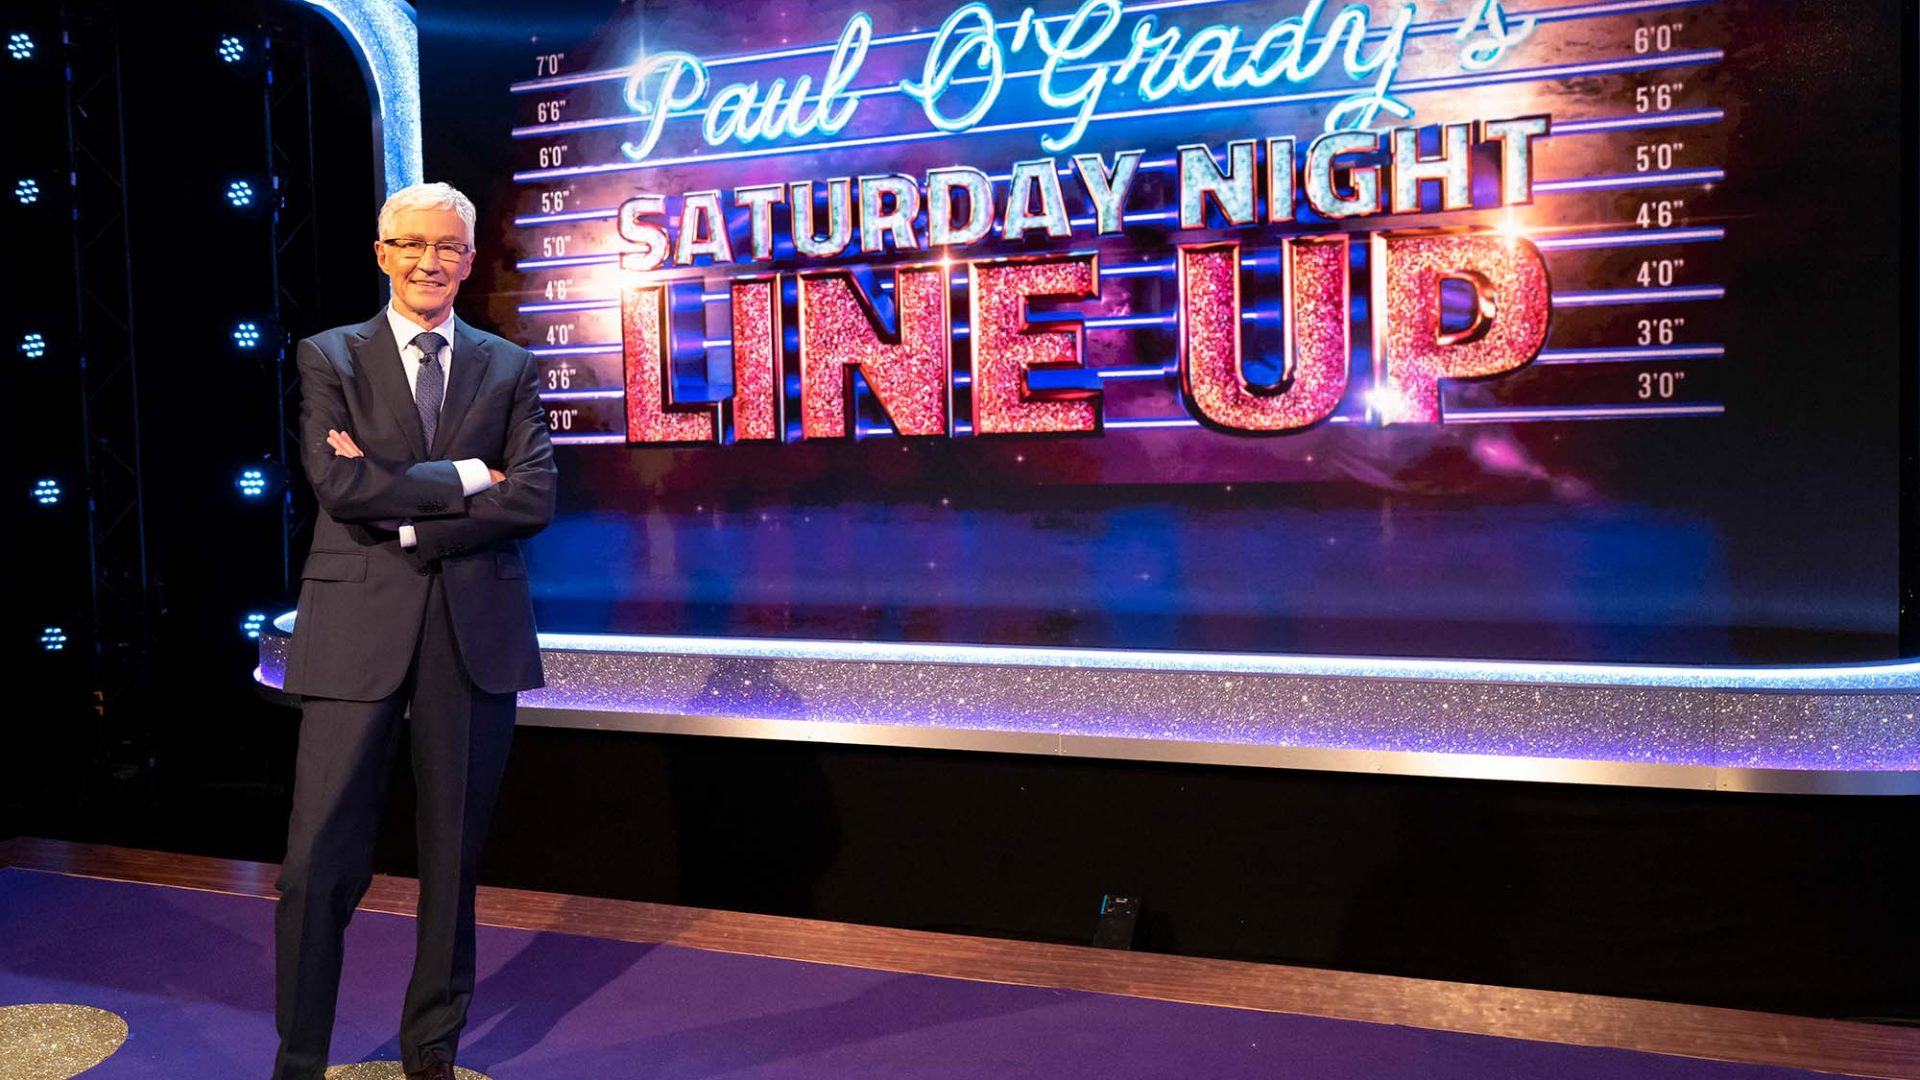 Paul O'Grady's Saturday Night Line Up, from ITV Picture Publicity. One use only. Picture: Olga TV/Silver Star Productions Ltd